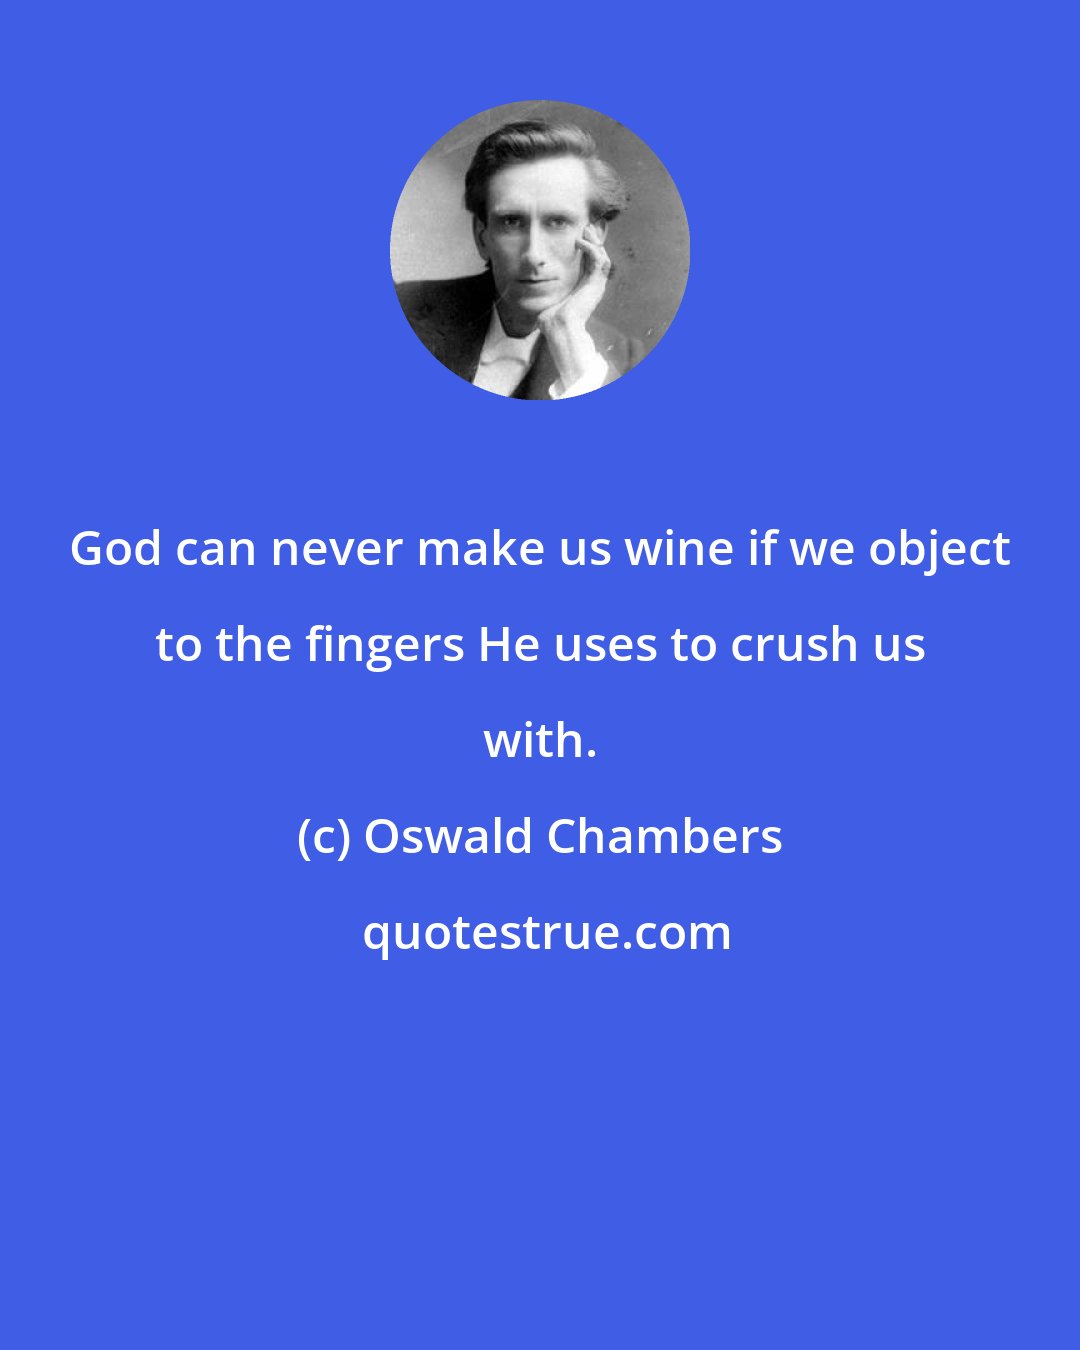 Oswald Chambers: God can never make us wine if we object to the fingers He uses to crush us with.